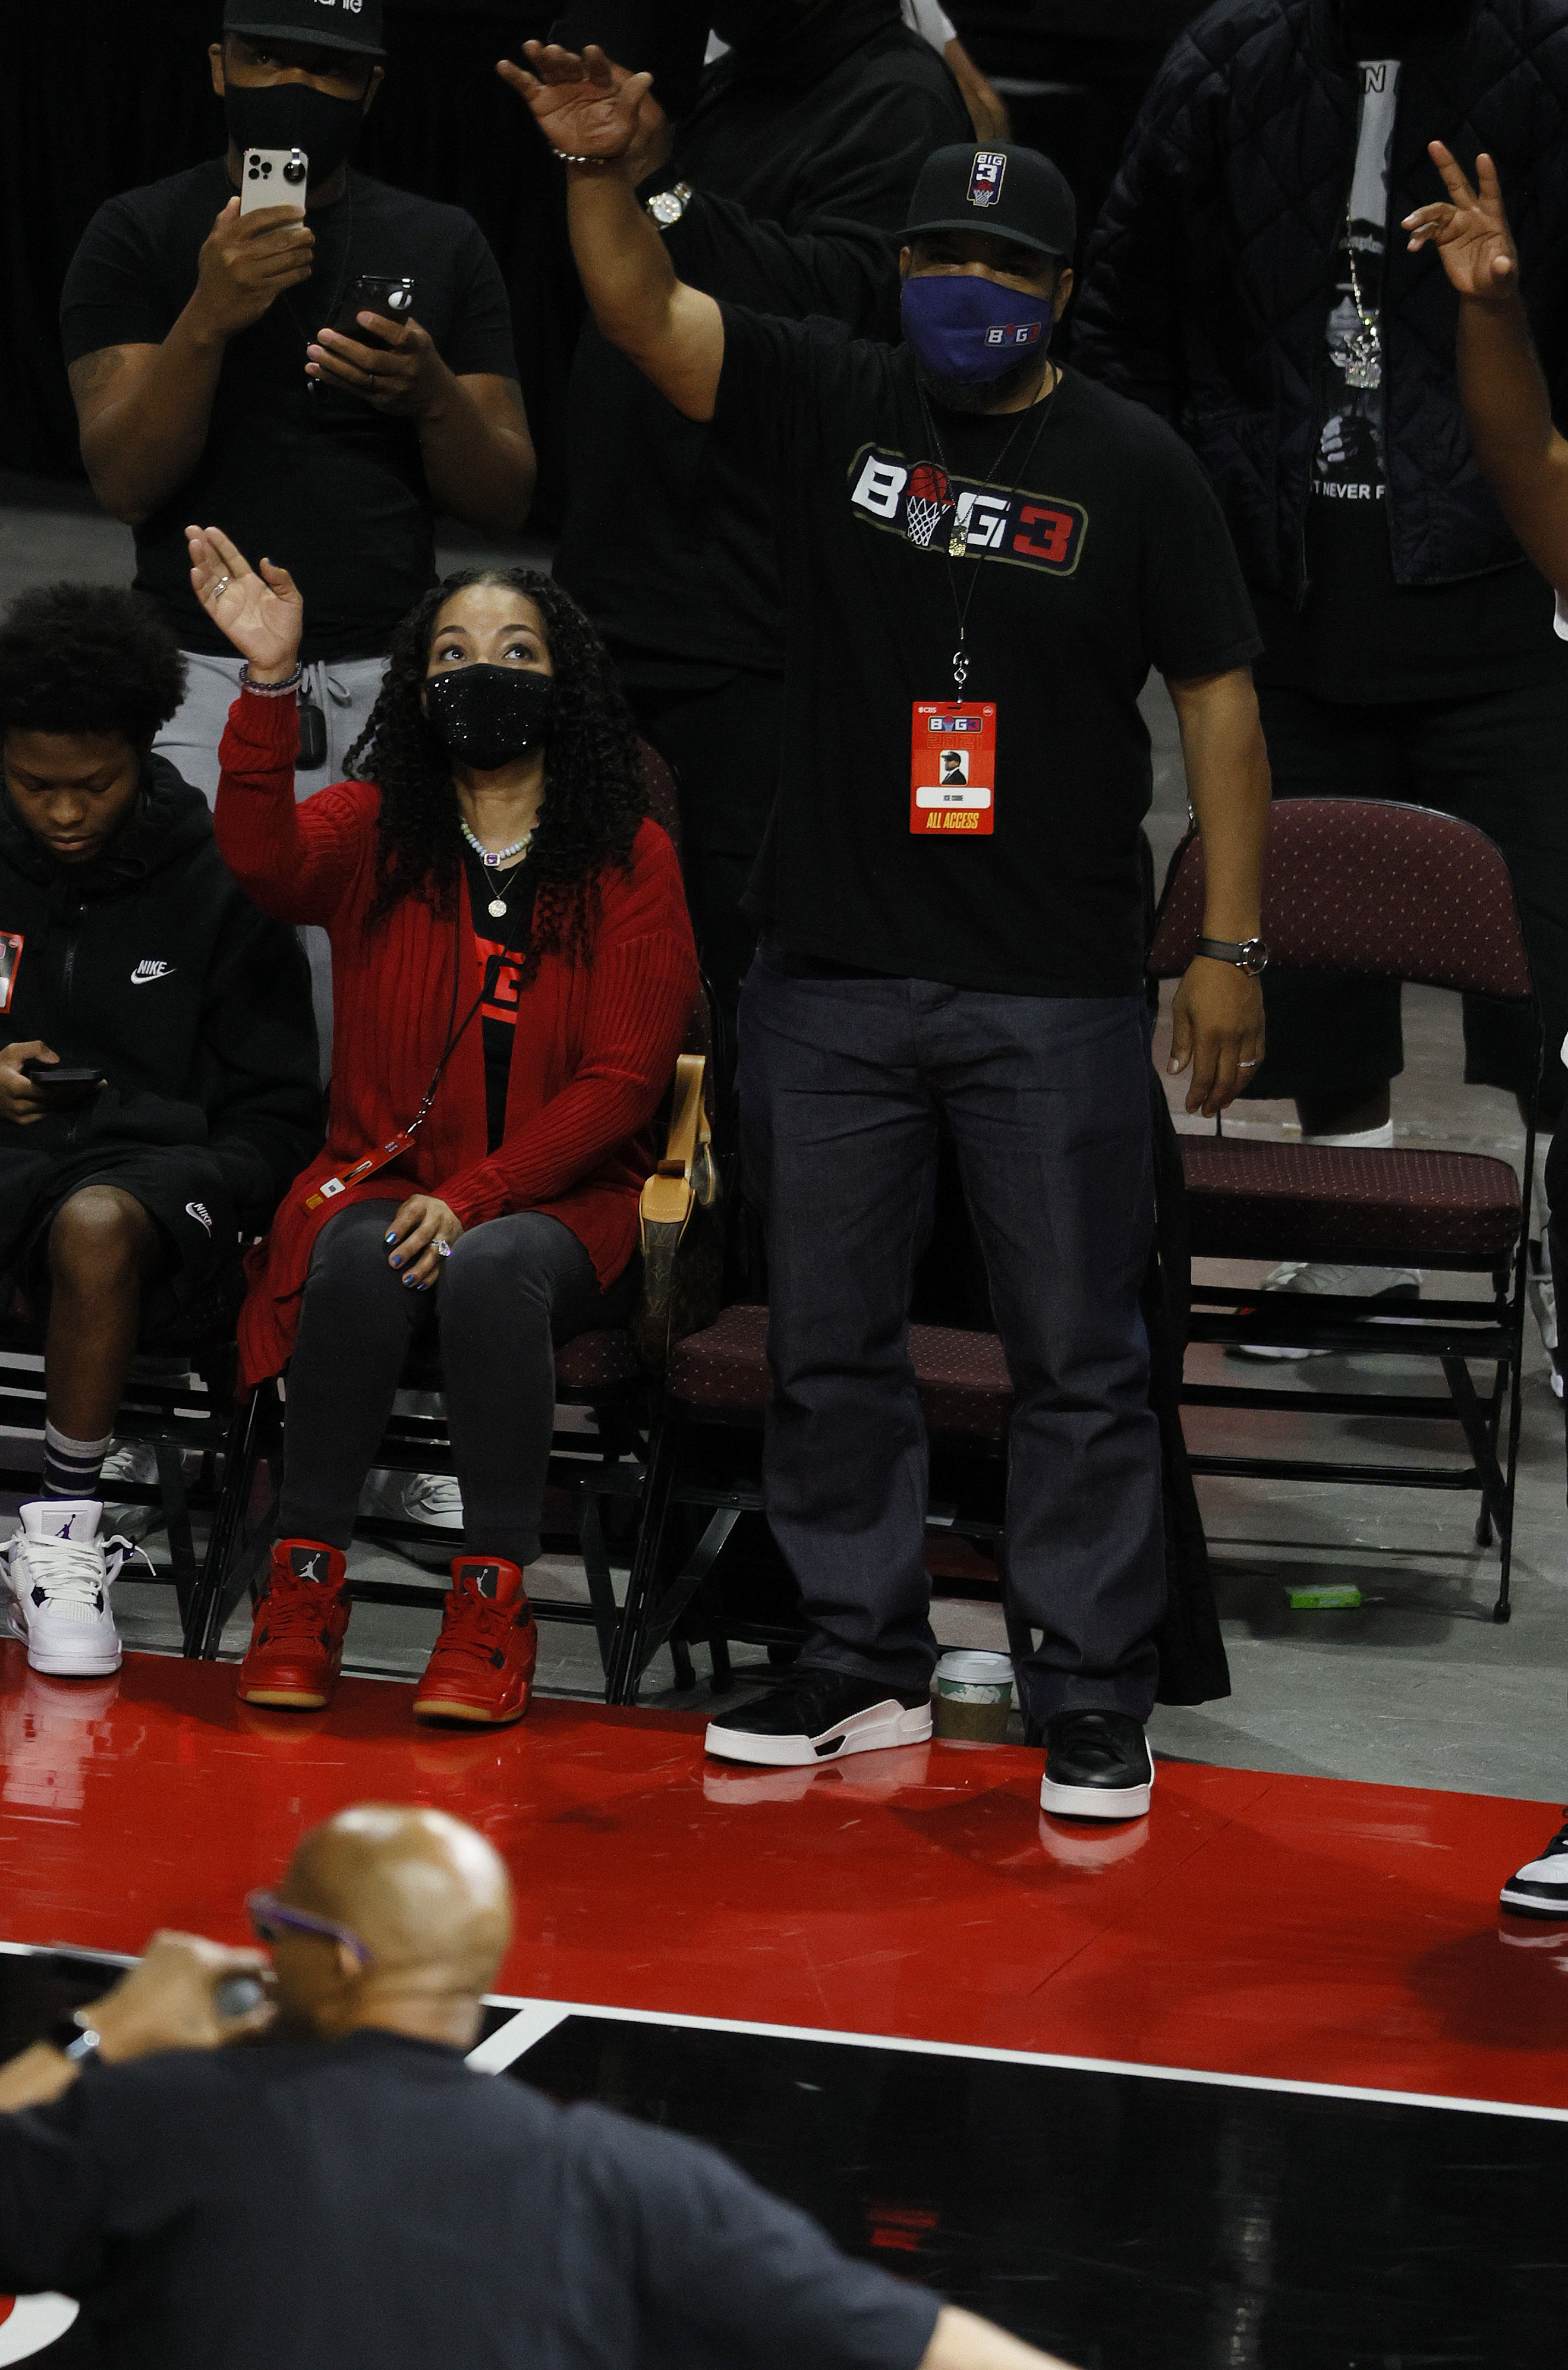 Kimberly Woodruff and Ice Cube at the Orleans Arena on July 24, 2021, in Las Vegas, Nevada. | Source: Getty Images